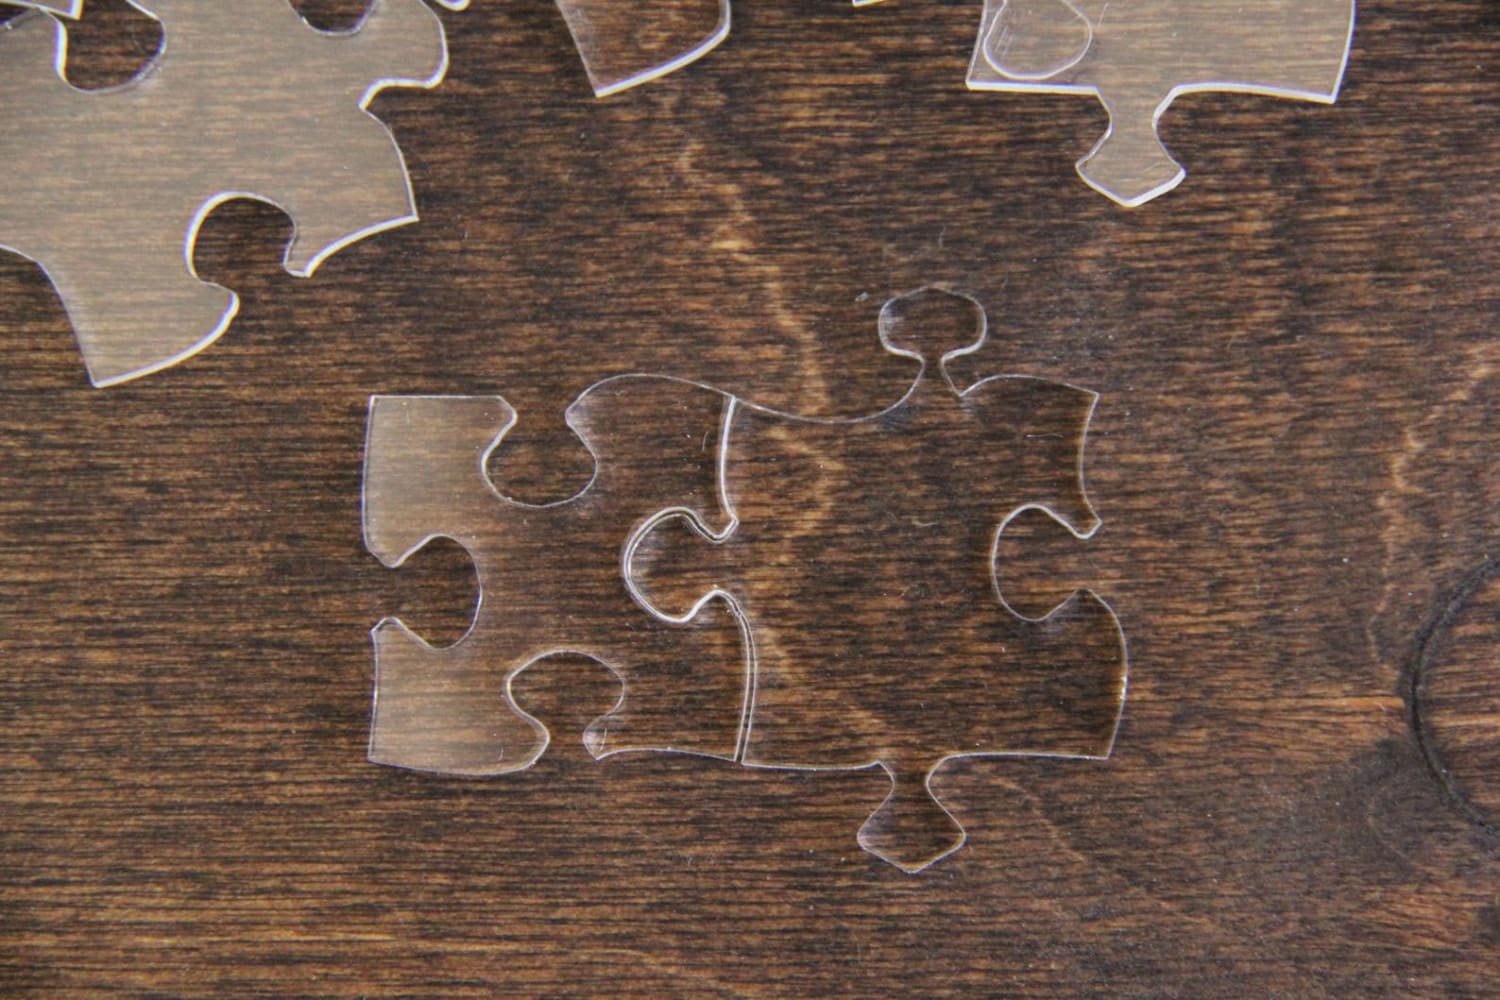 Puzzle Puzzle Transparent Puzzle. Transparent Acrylic Puzzle. Different  Levels of Difficulty. Crazy Puzzle. Clear Jigsaw. 